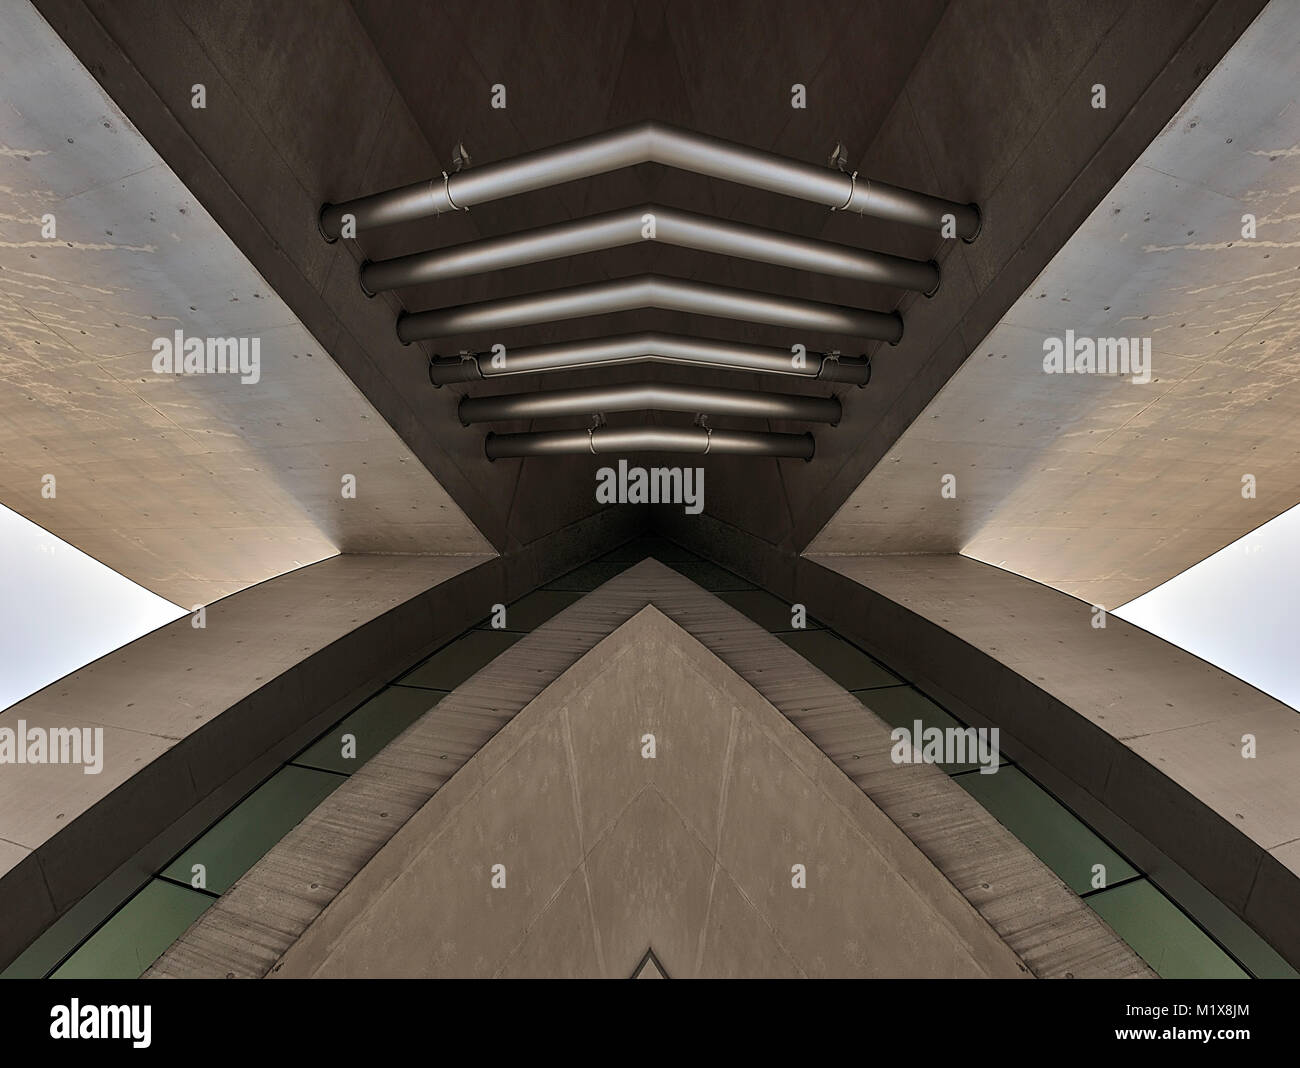 Architectural symmetry obtained with the repeated juxtaposition of the original image Stock Photo